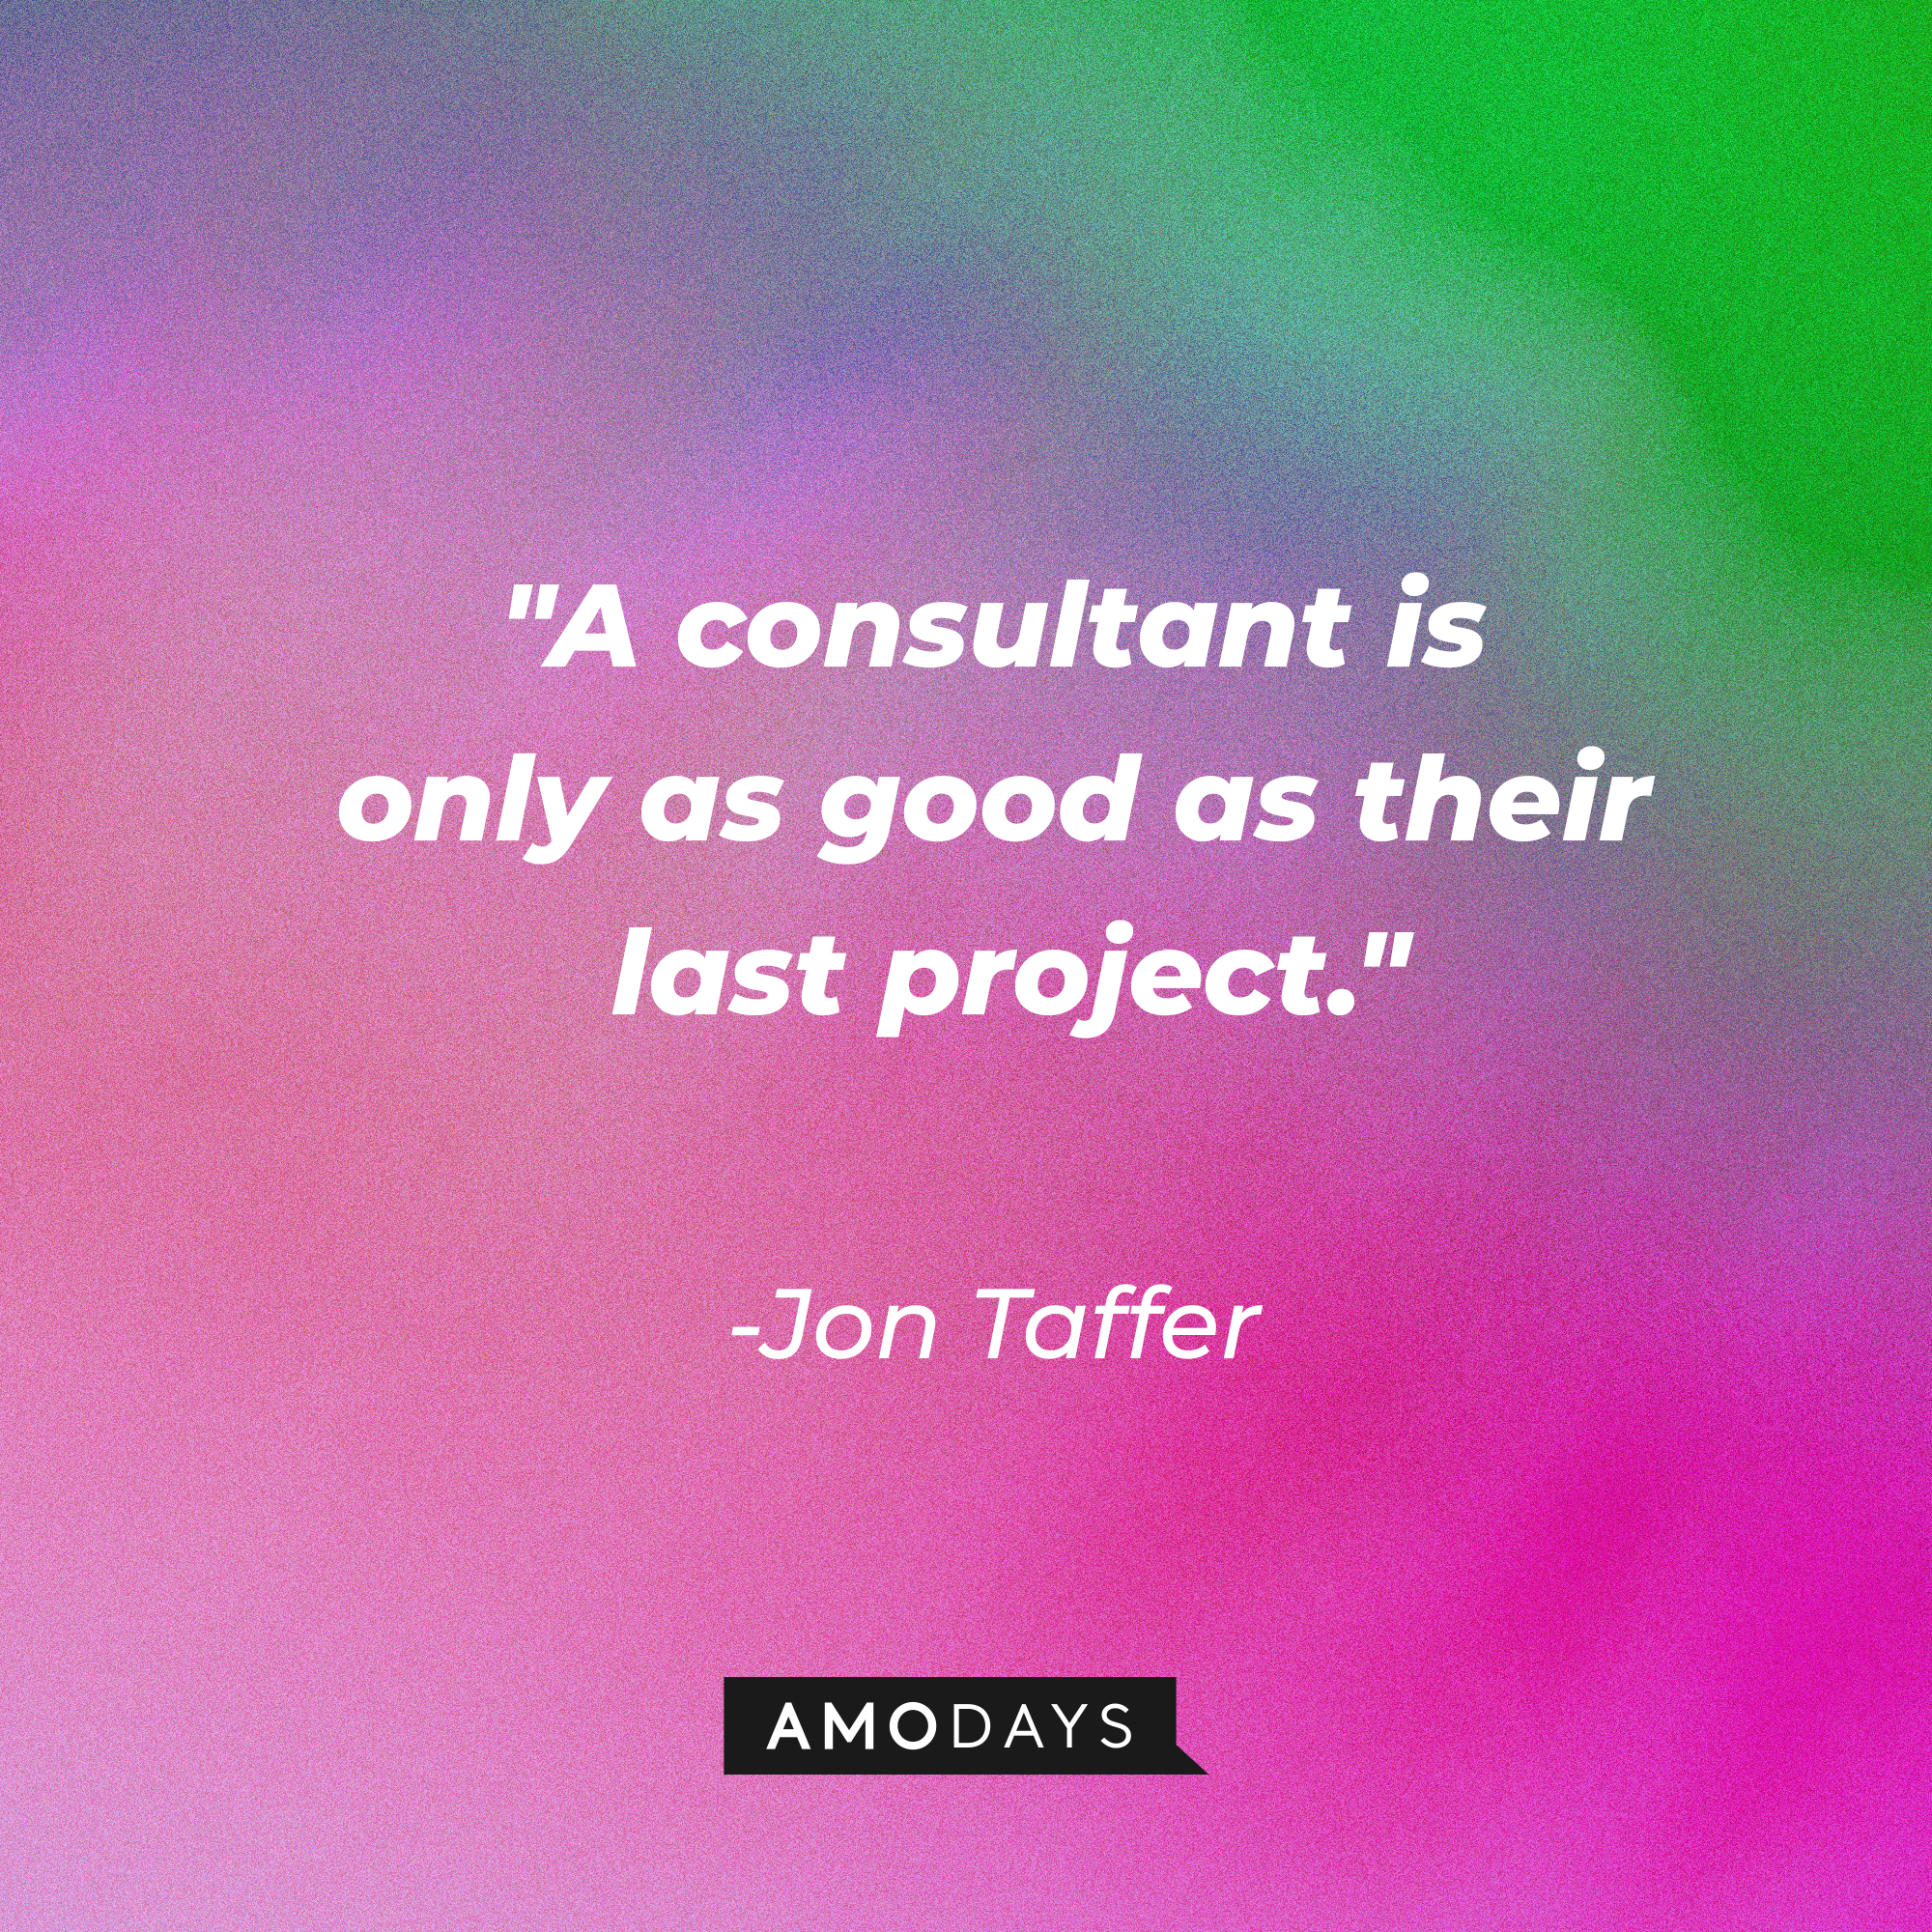 Jon Taffer's quote, "A consultant is only as good as their last project." | Image: AmoDays